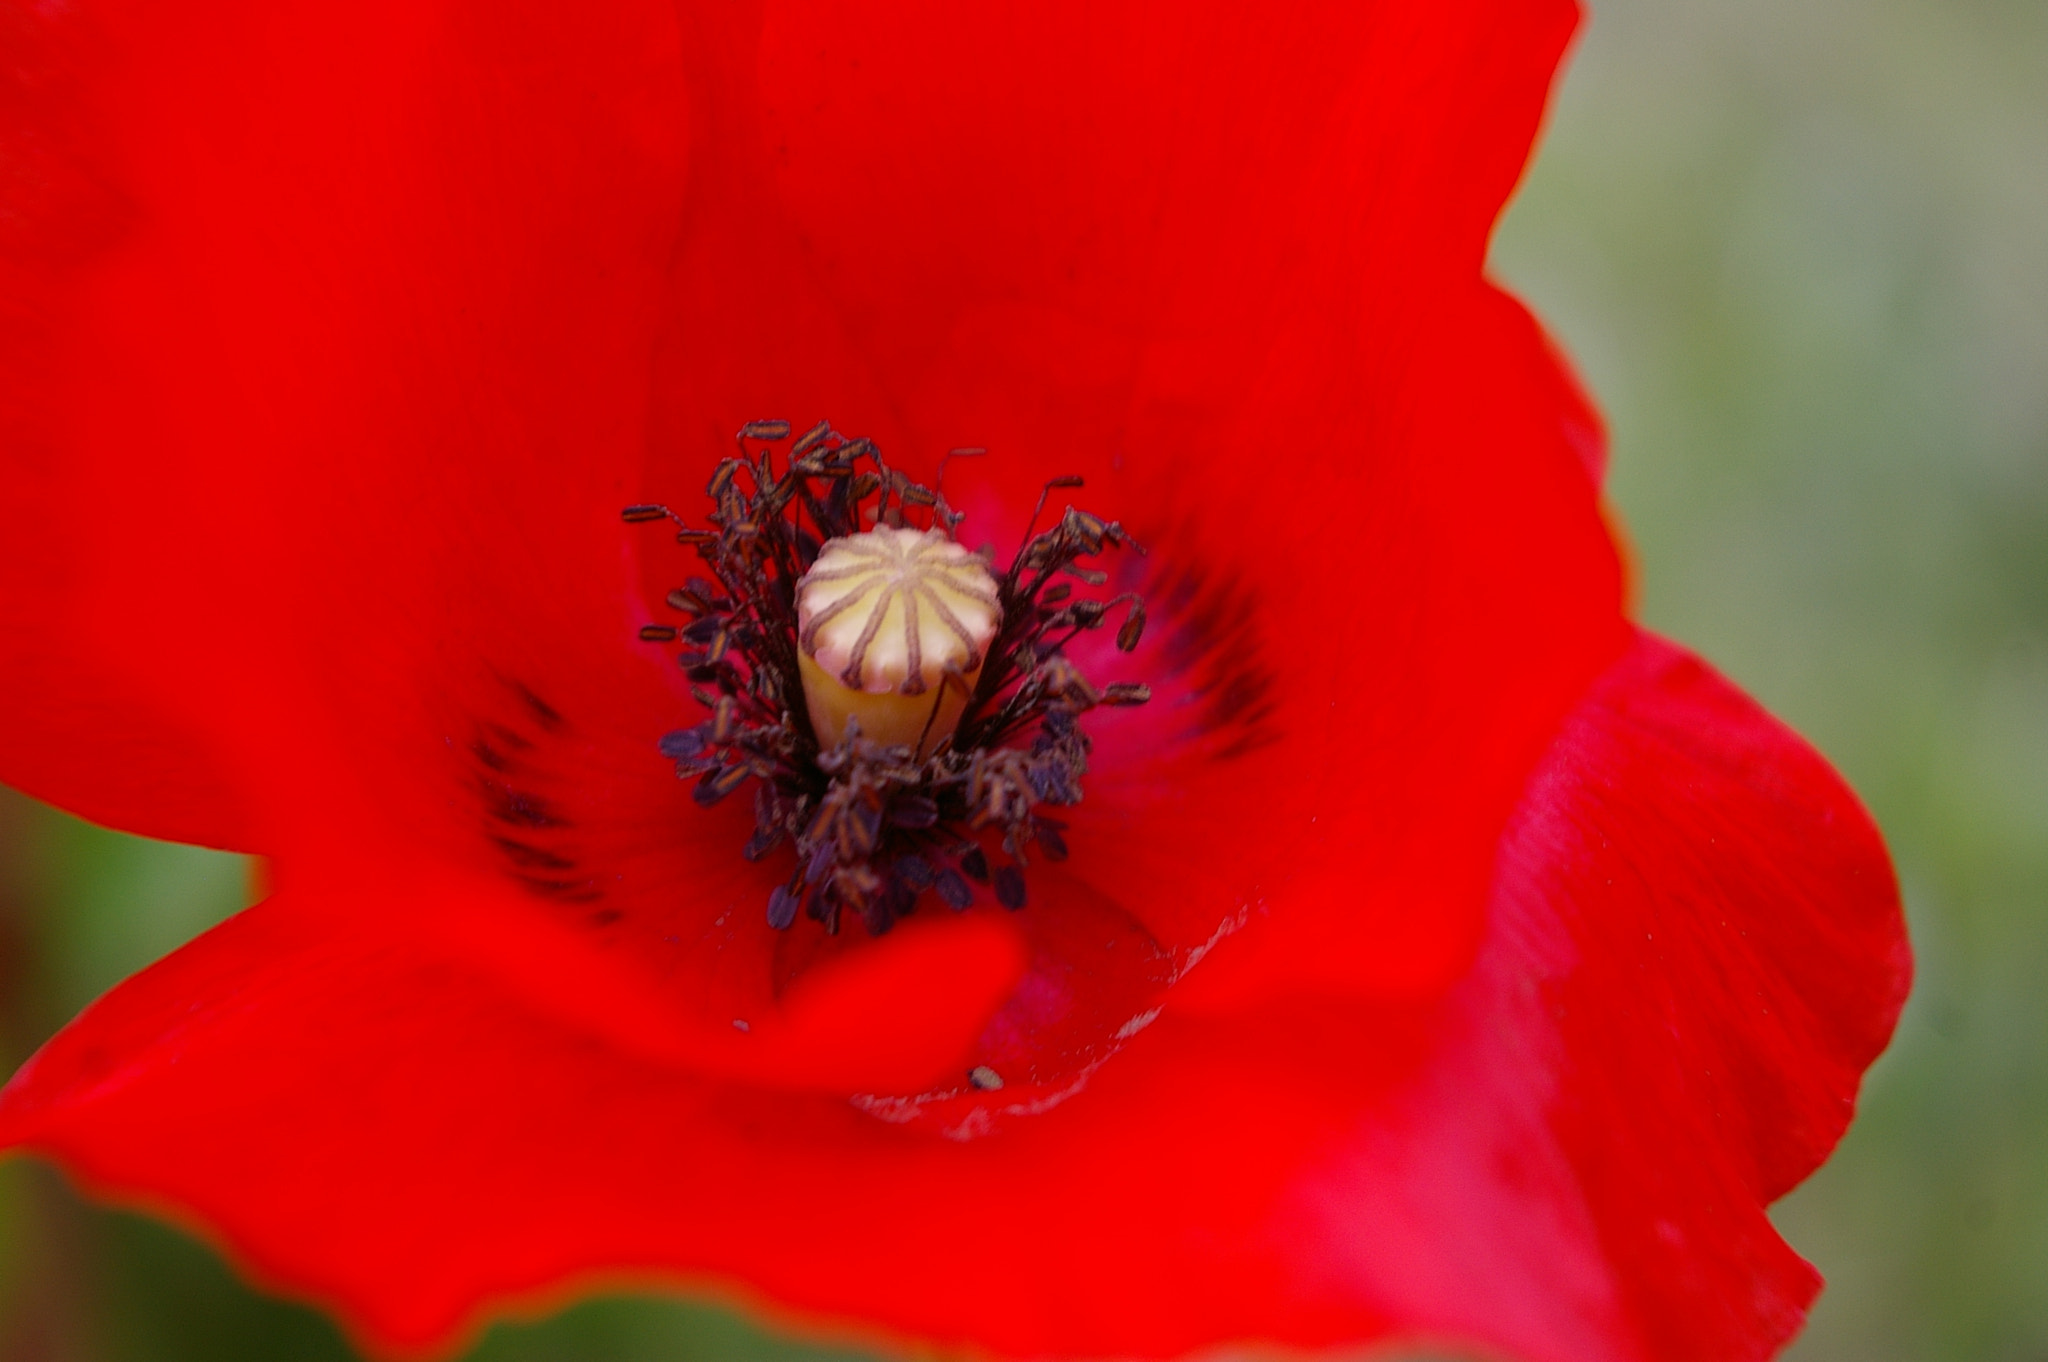 Pentax *ist DS sample photo. The red poppy photography